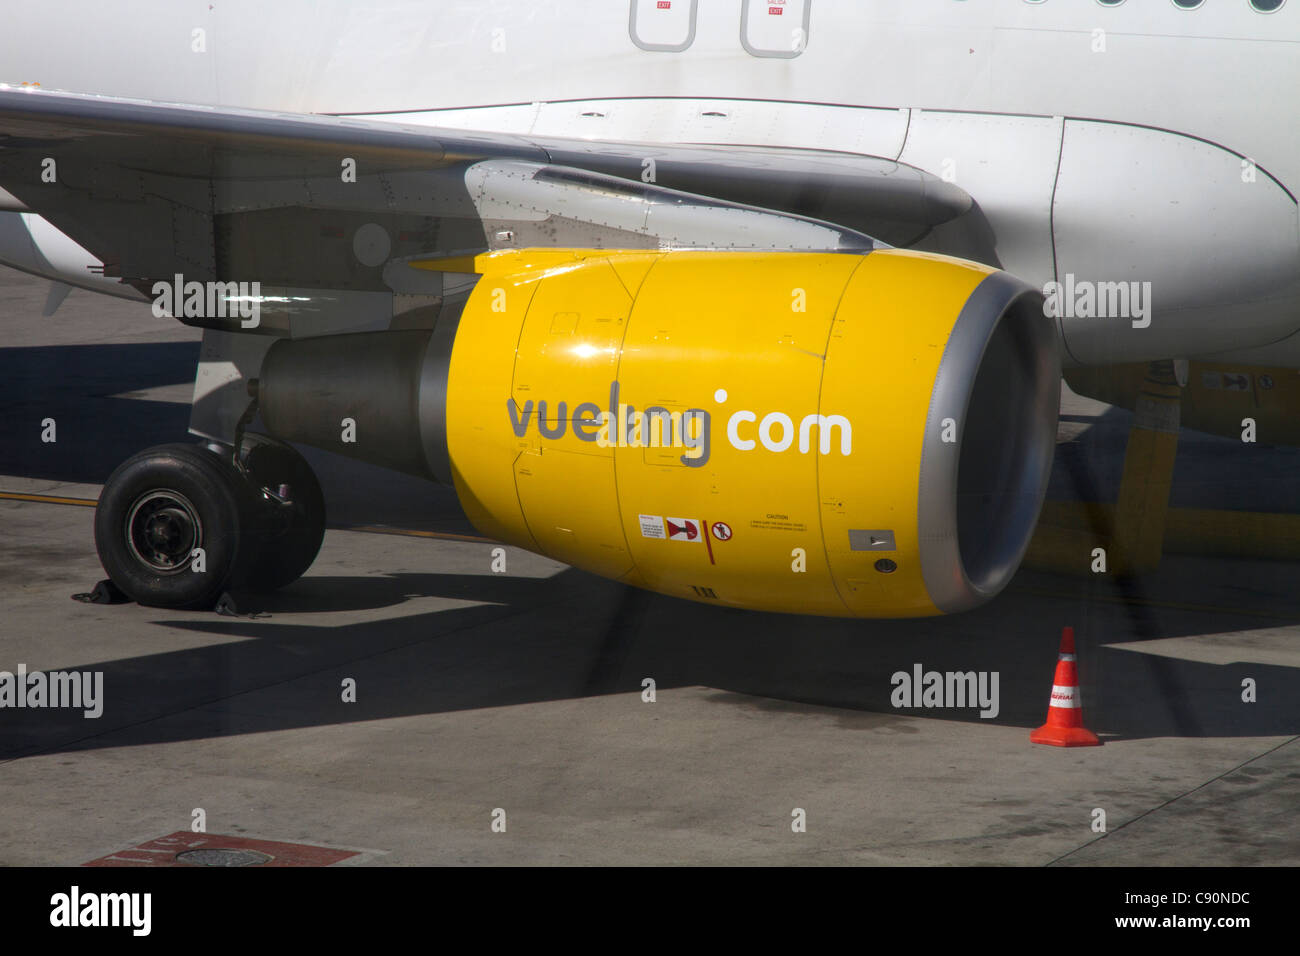 Vueling sign on airplane motor, Vueling in a low-cost modern airline brand of Iberia Spain Stock Photo